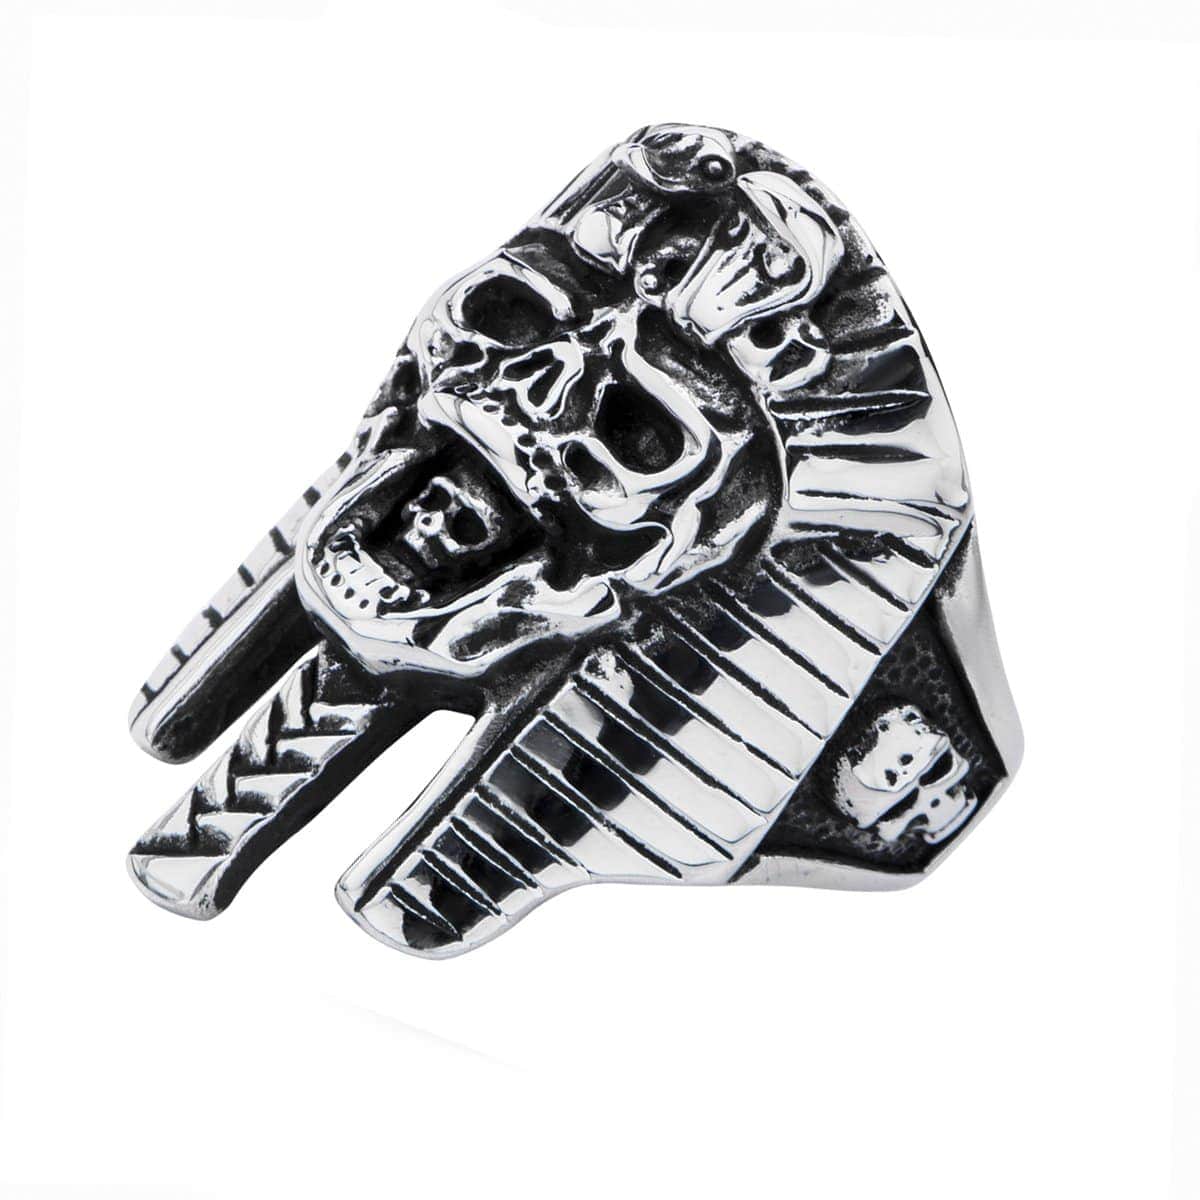 INOX JEWELRY Rings Antiqued Silver Tone Stainless Steel Pharaoh Skull Ring